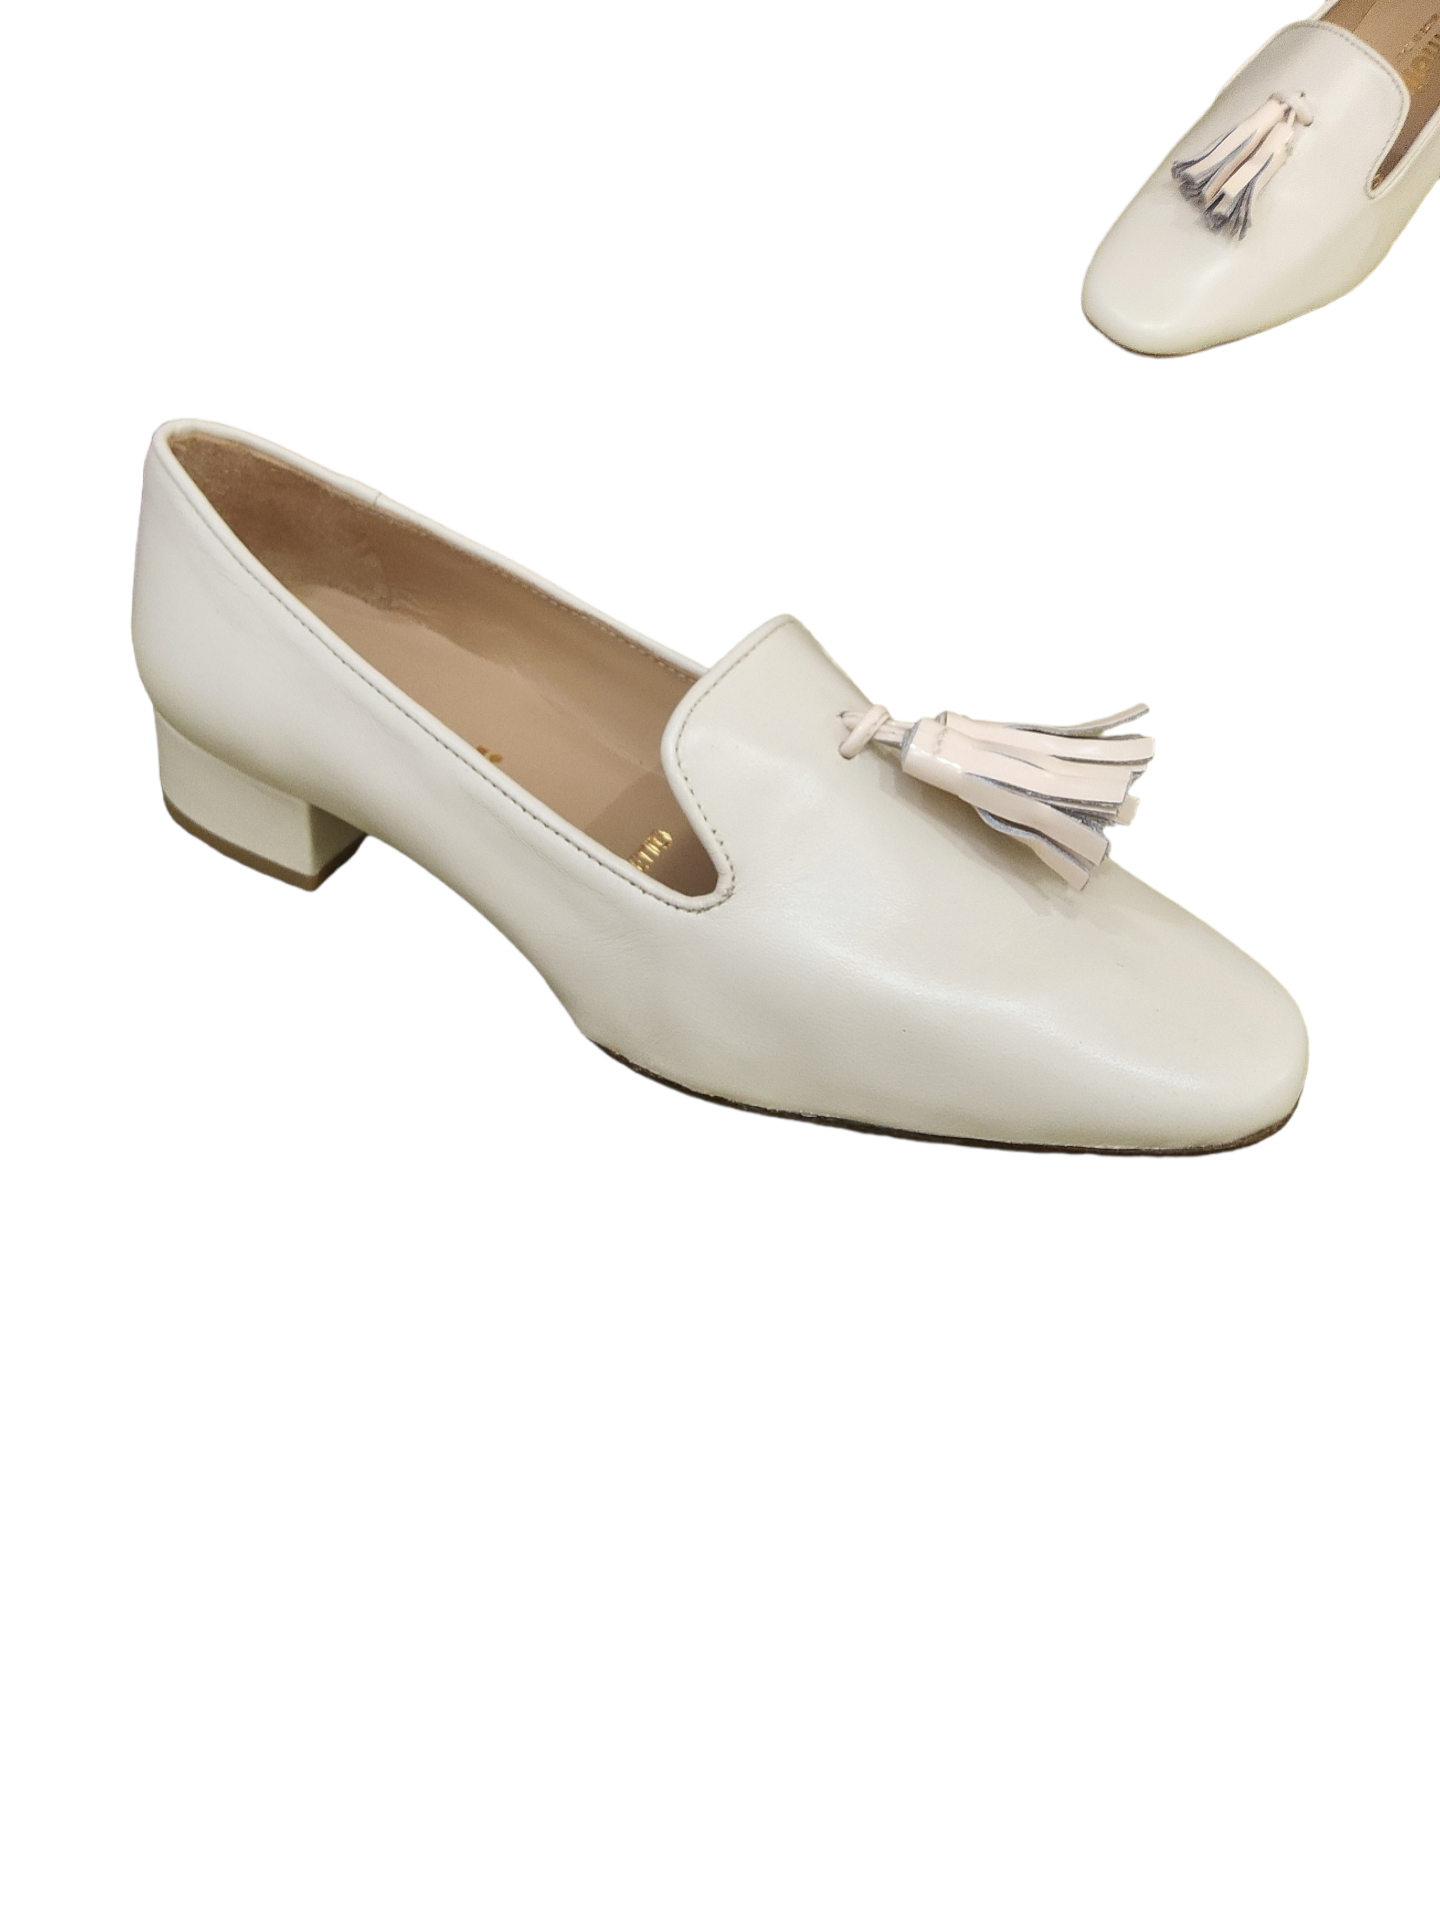 Cream leather loafers